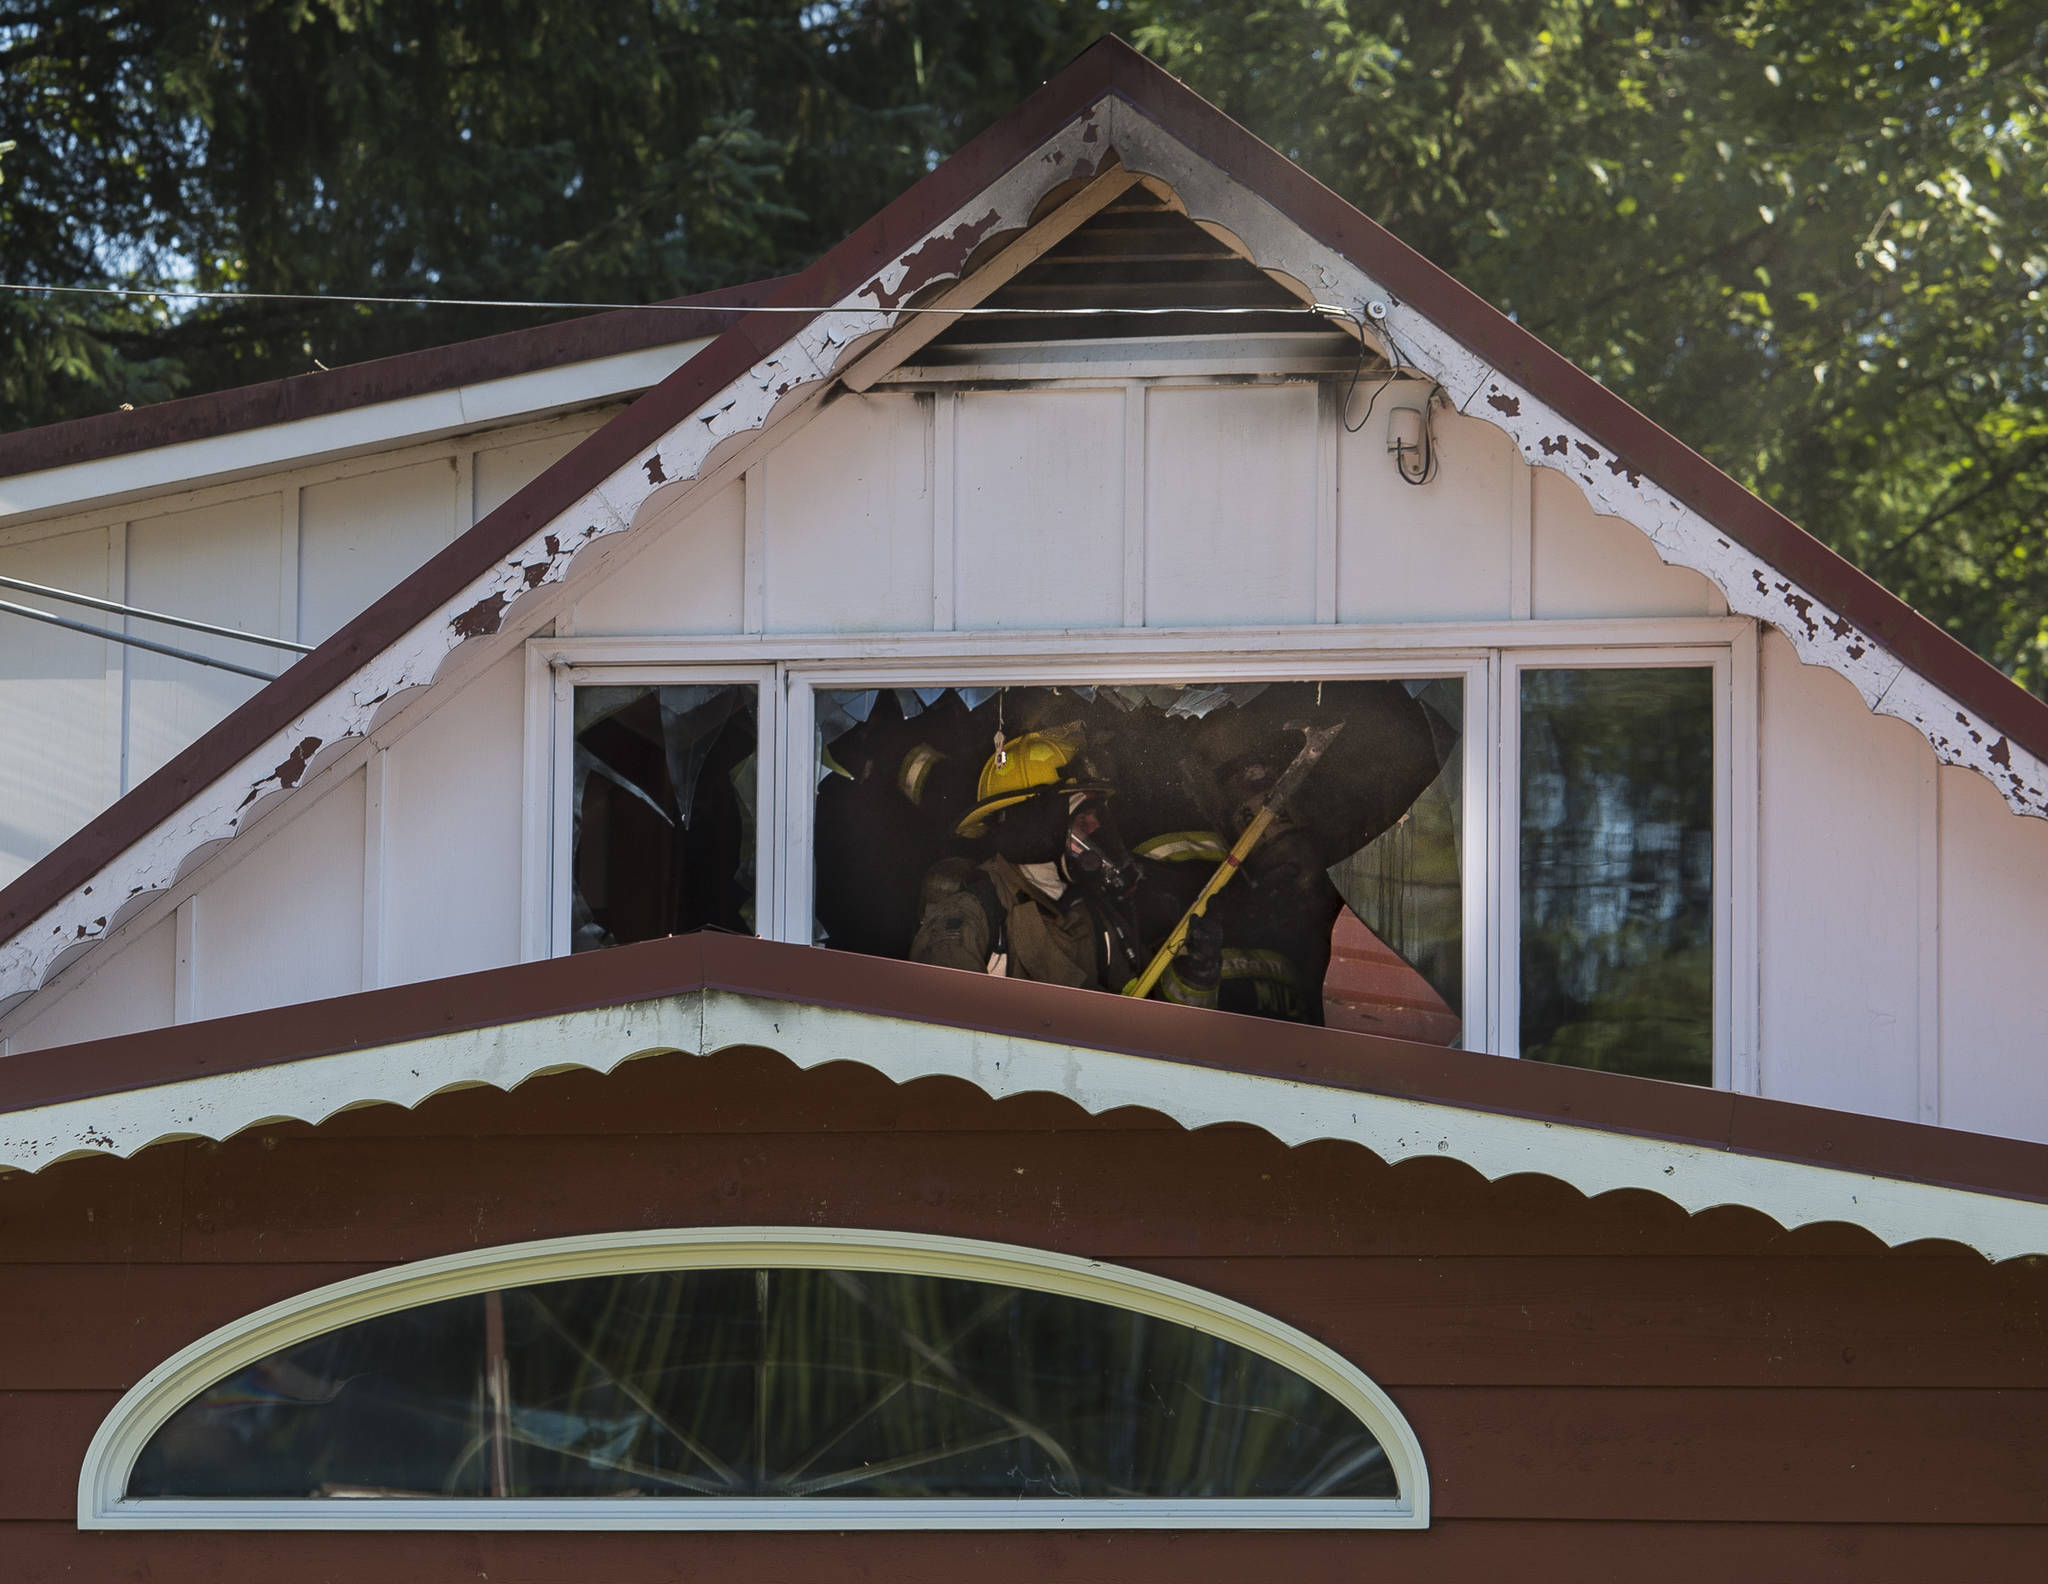 Capital City Fire/Rescue firemen open up a ceiling in an second-story room as they fight a house fire at 8460 Kimberly Street on Friday, July 20, 2018. (Michael Penn | Juneau Empire)